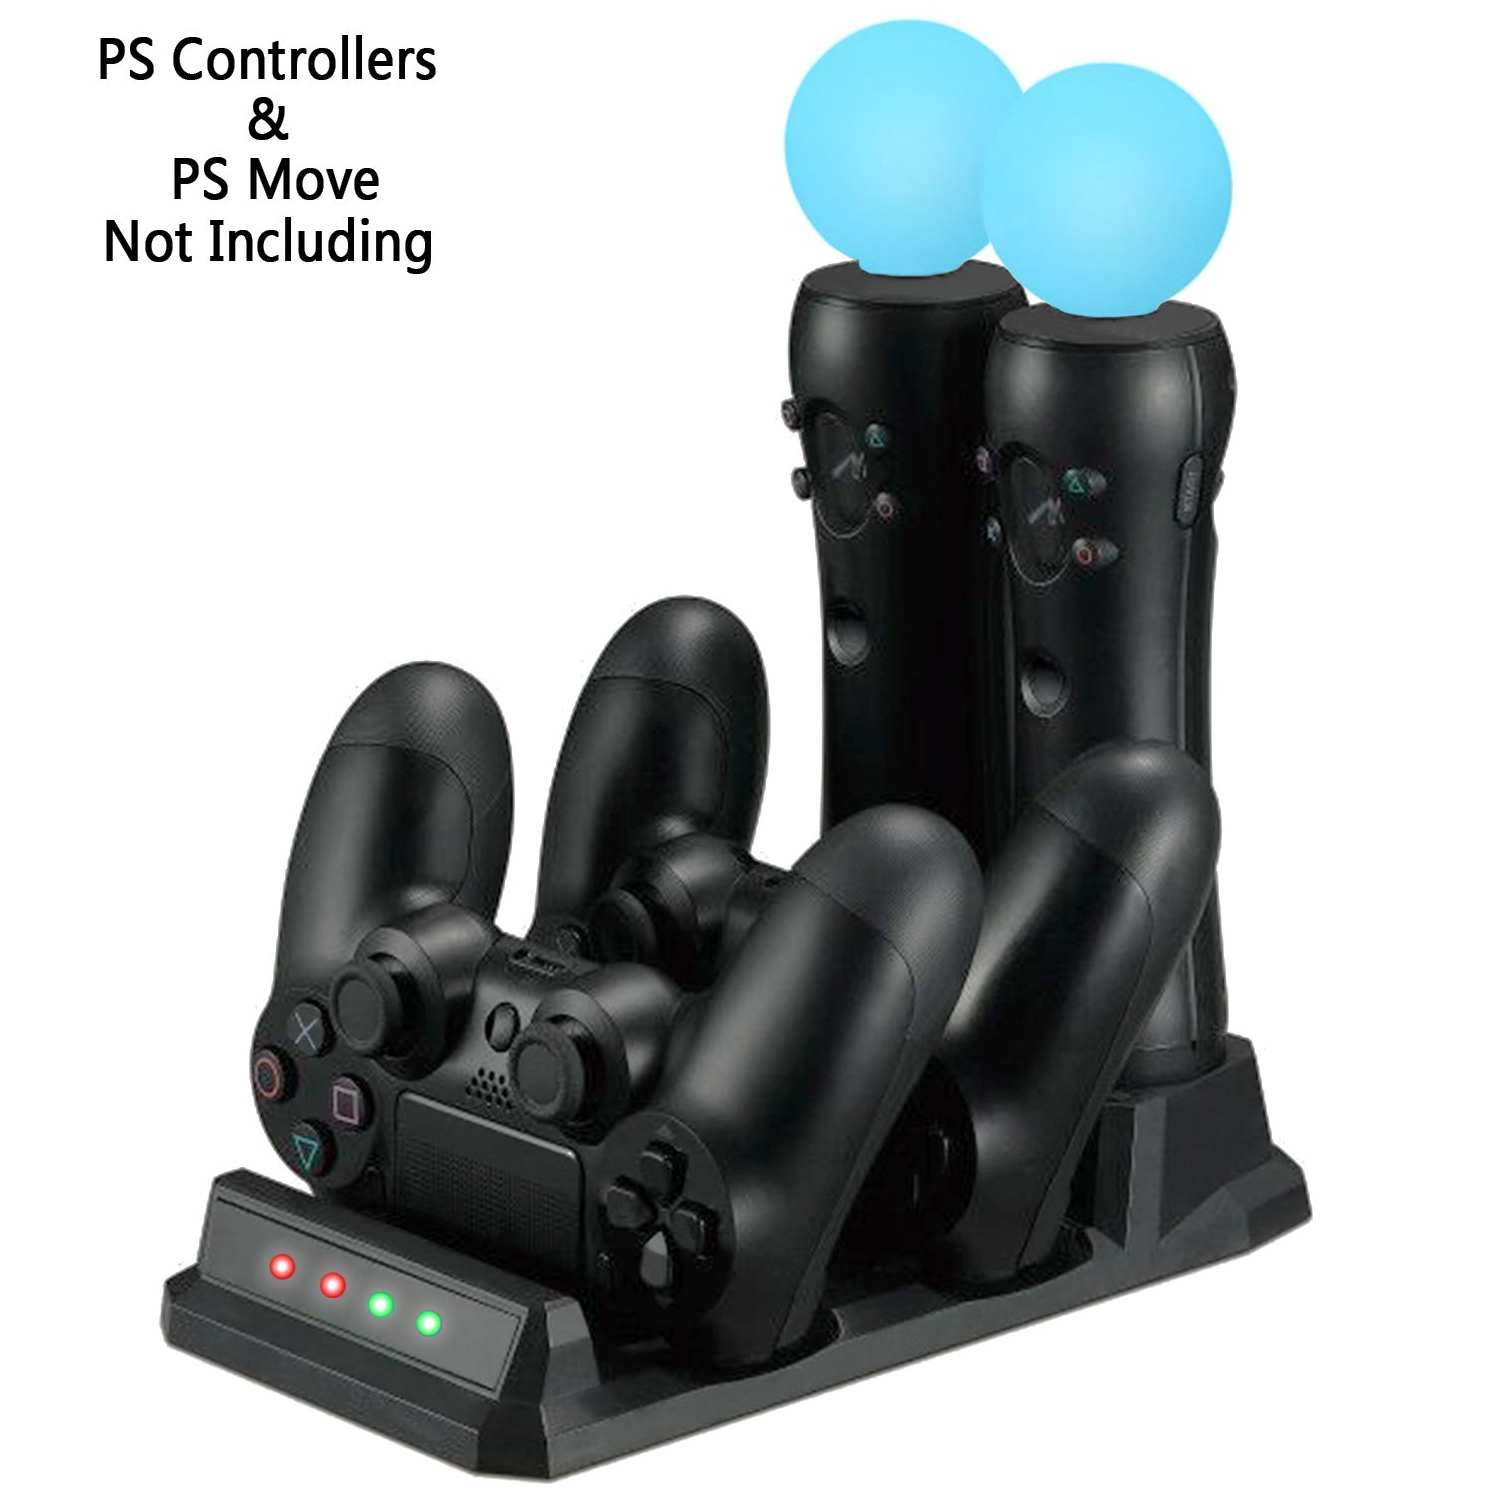 Quad Charging Station for PS Move Motion and PS4 Controller of SONY Playstation 4